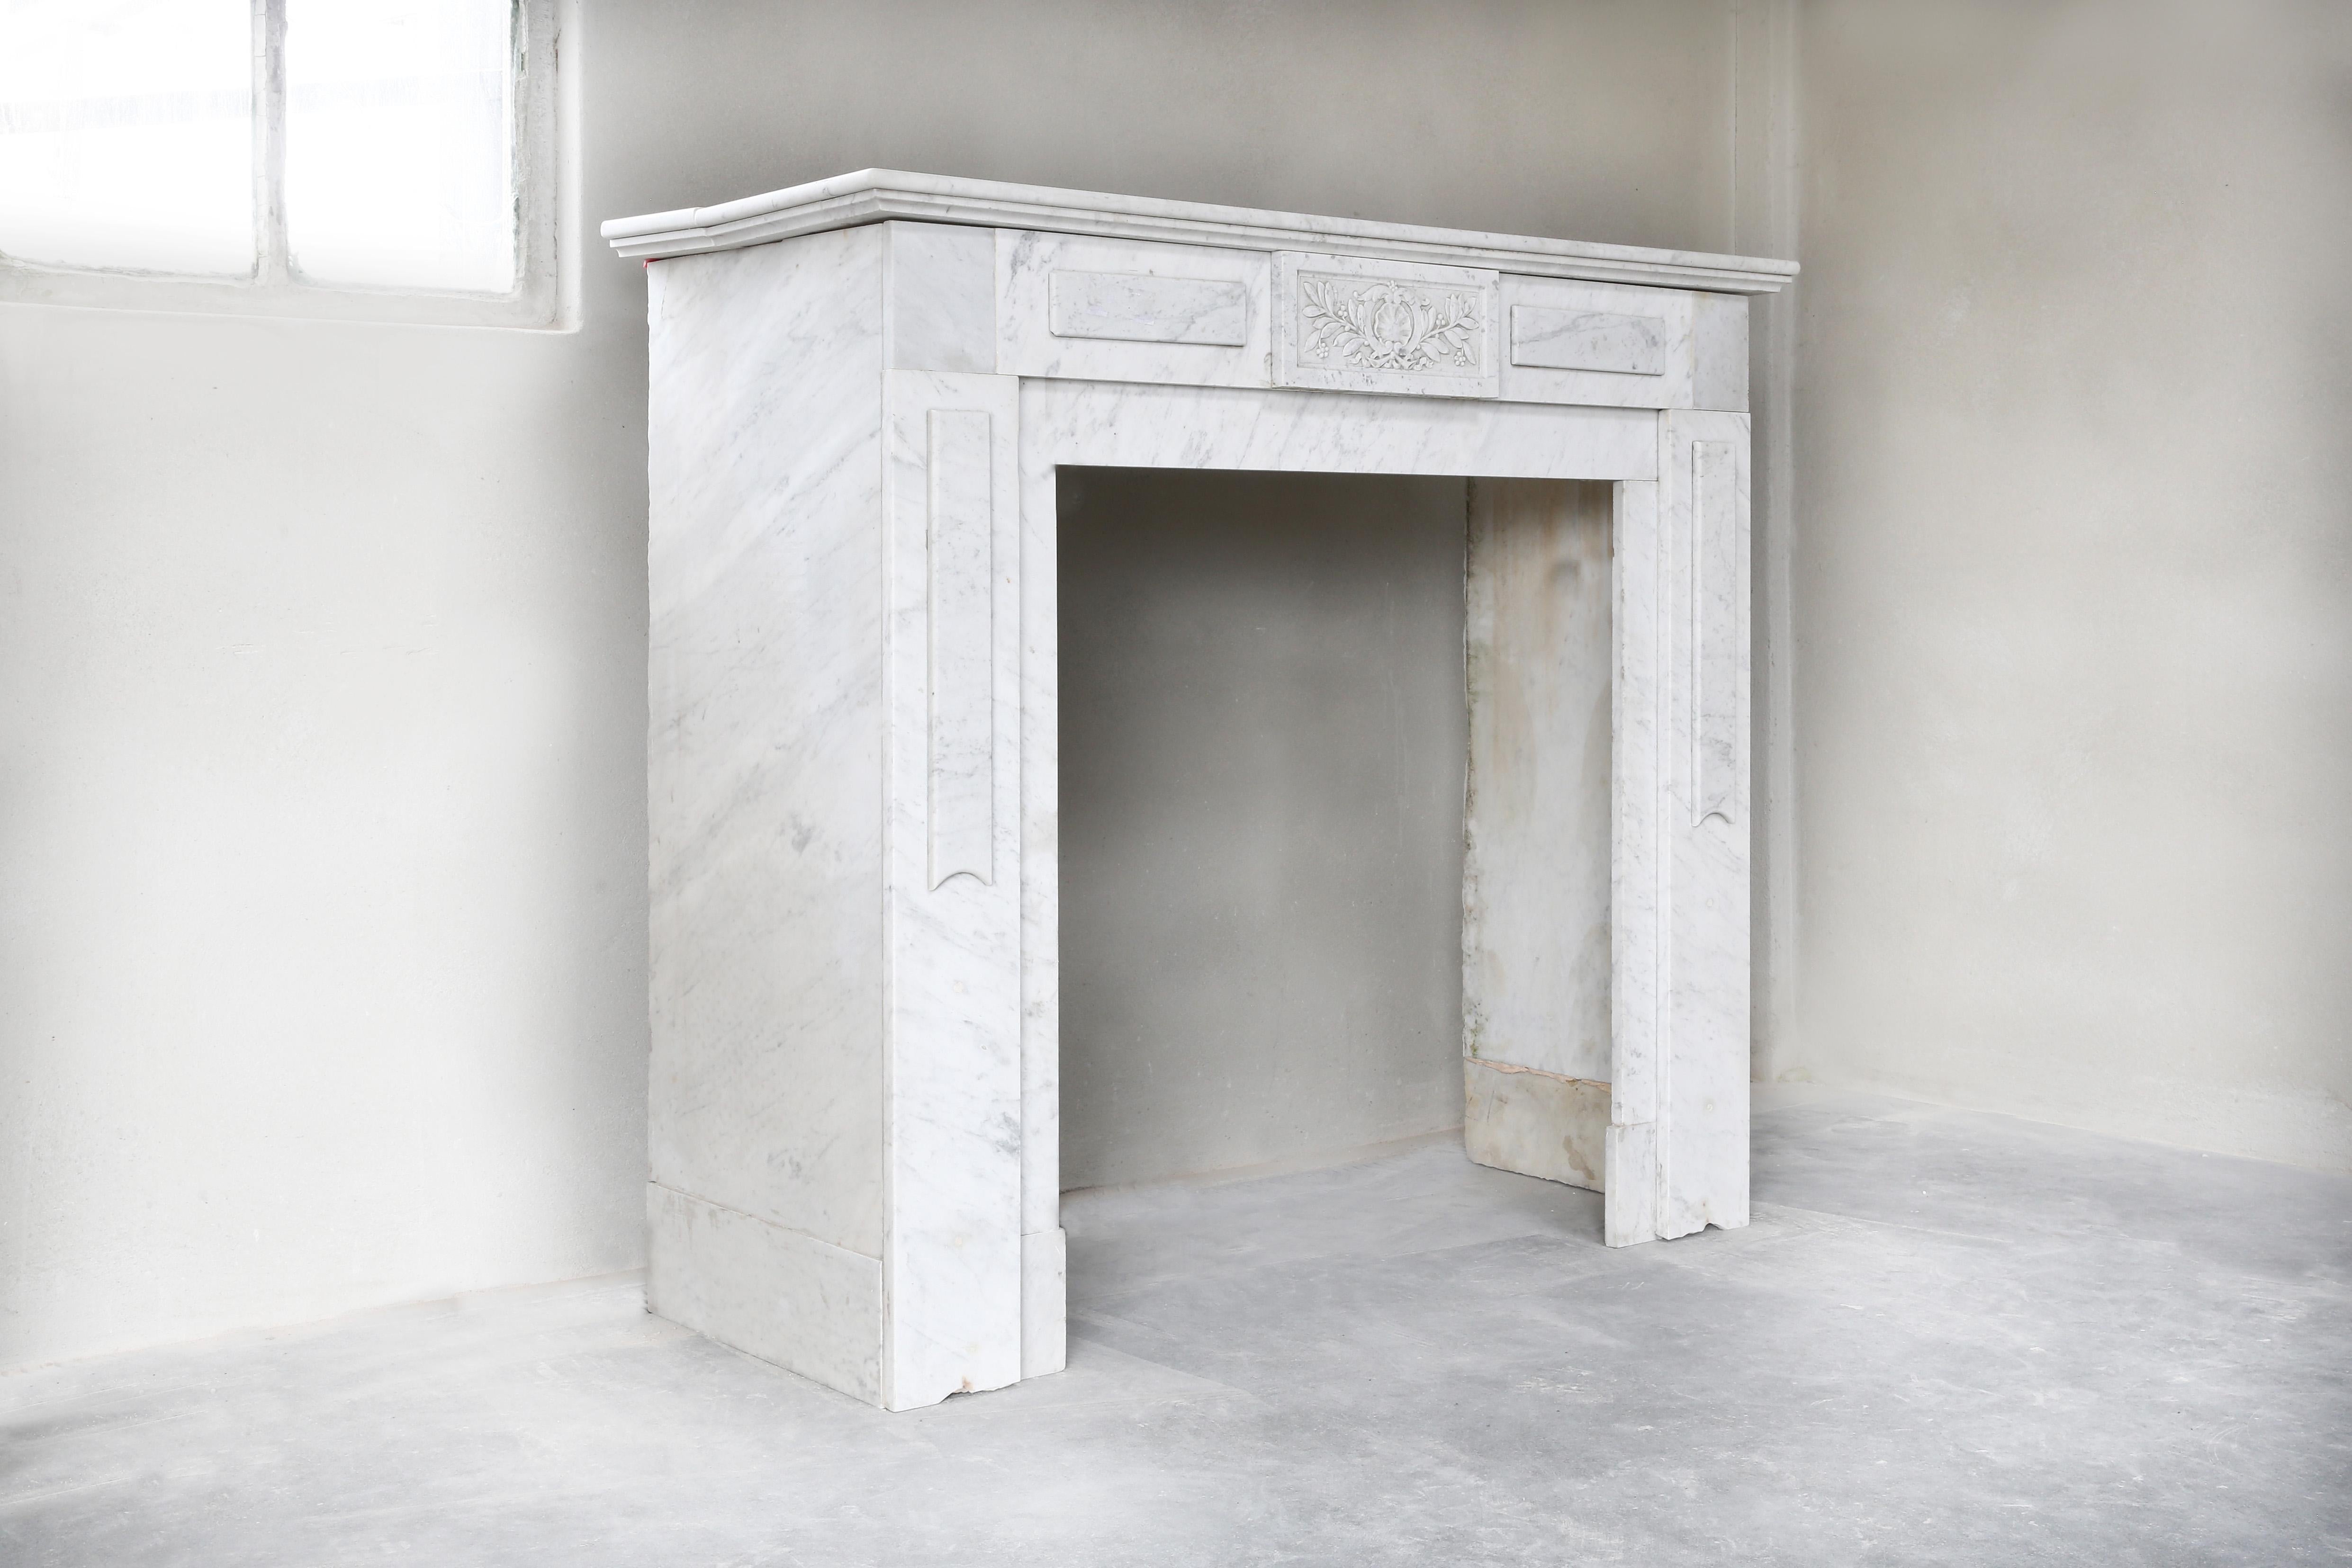 Antique white Carrara marble fireplace from the 19th century. Carrara marble comes from the Italian quarries of the city of Carrara. A beautiful white marble that is used for many applications. This fireplace is in the style of Louis XVI and has